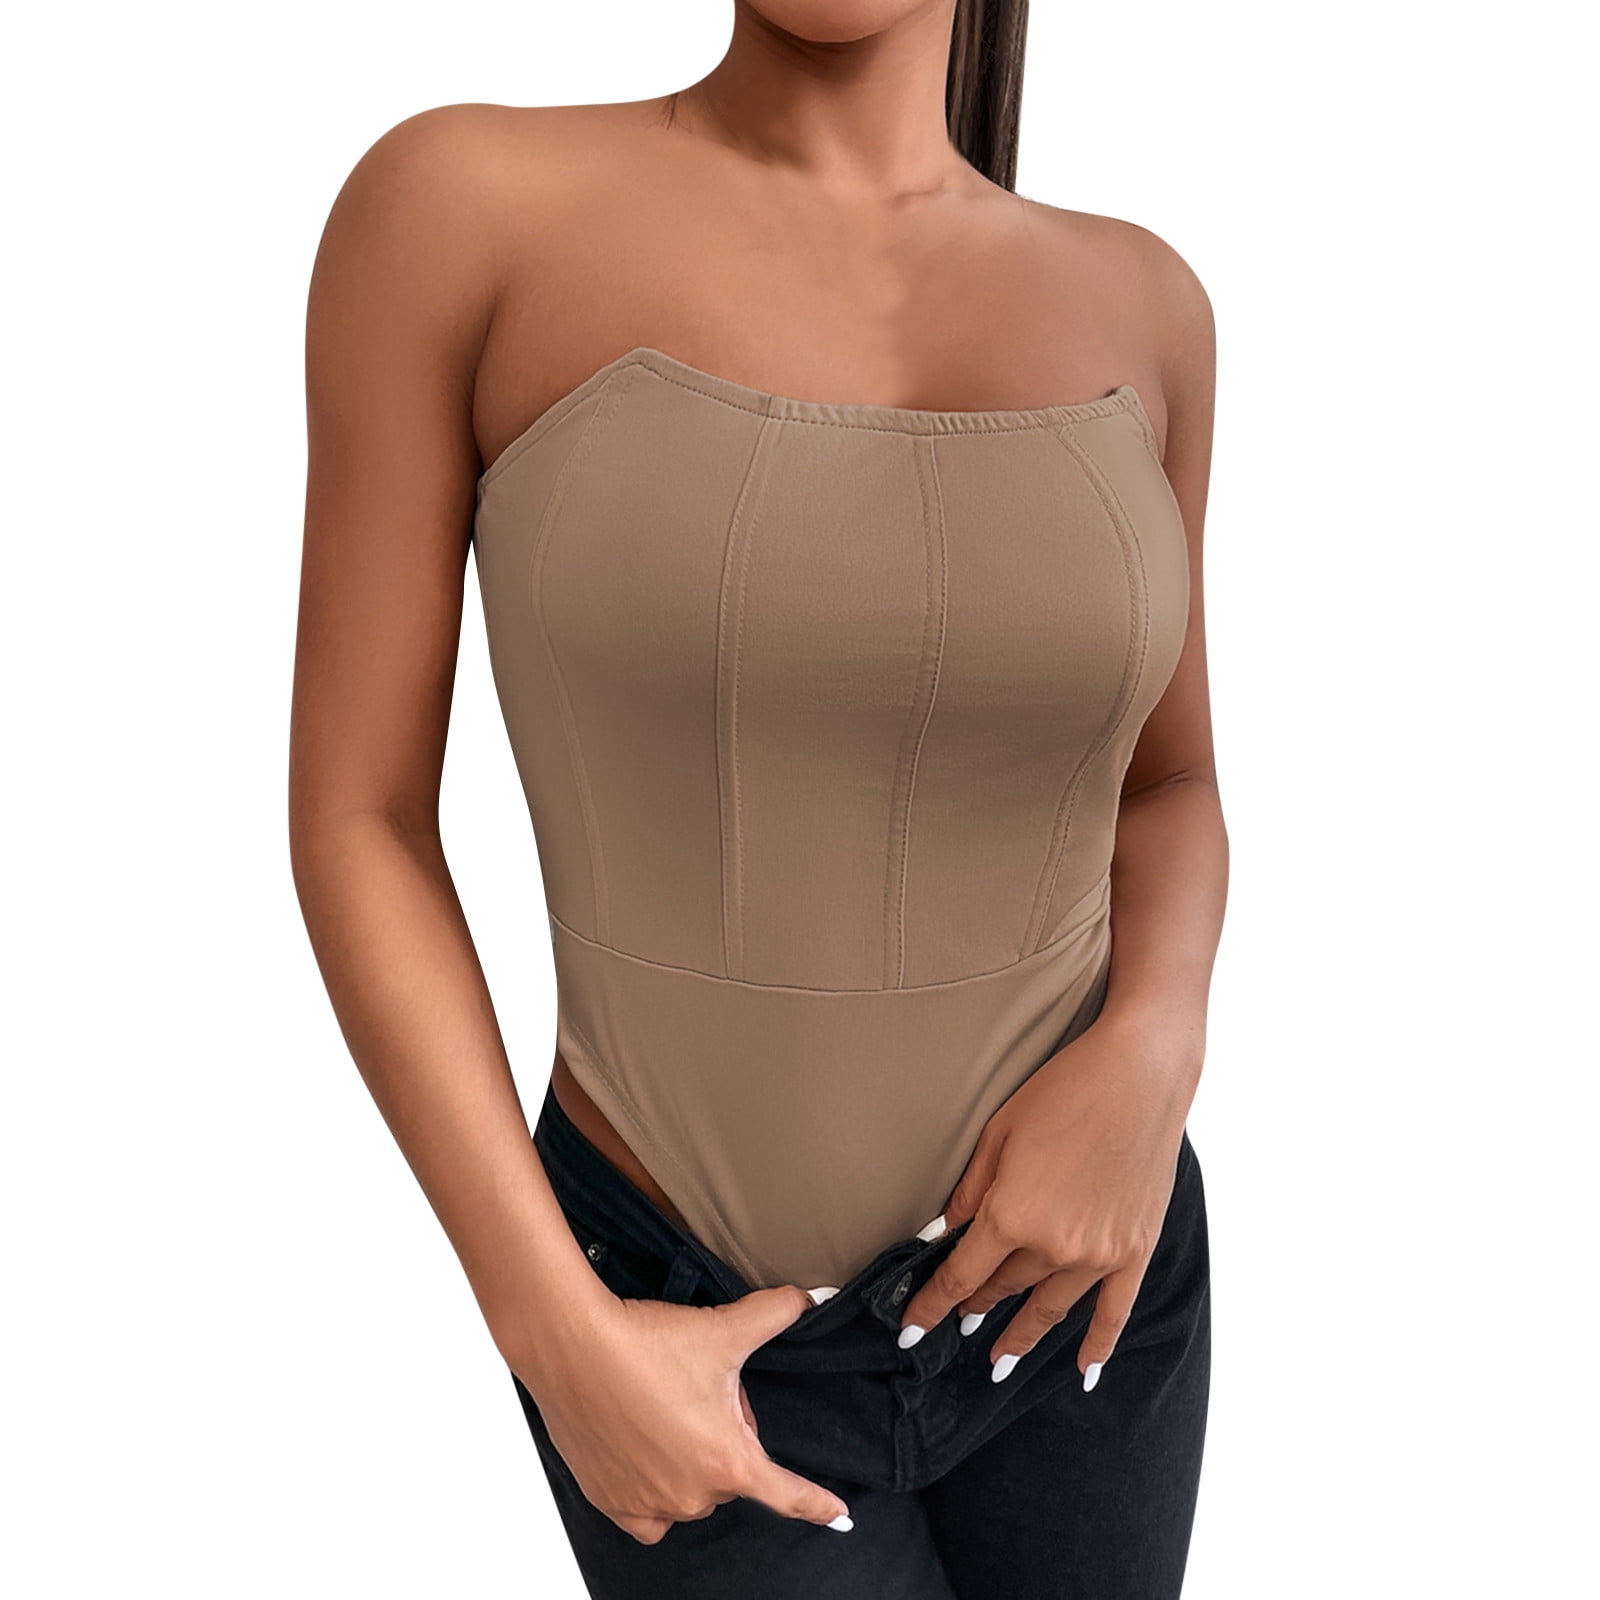 InstantFigure Women’s Firm Compression Shaping Full-Length Cami Bodysuit